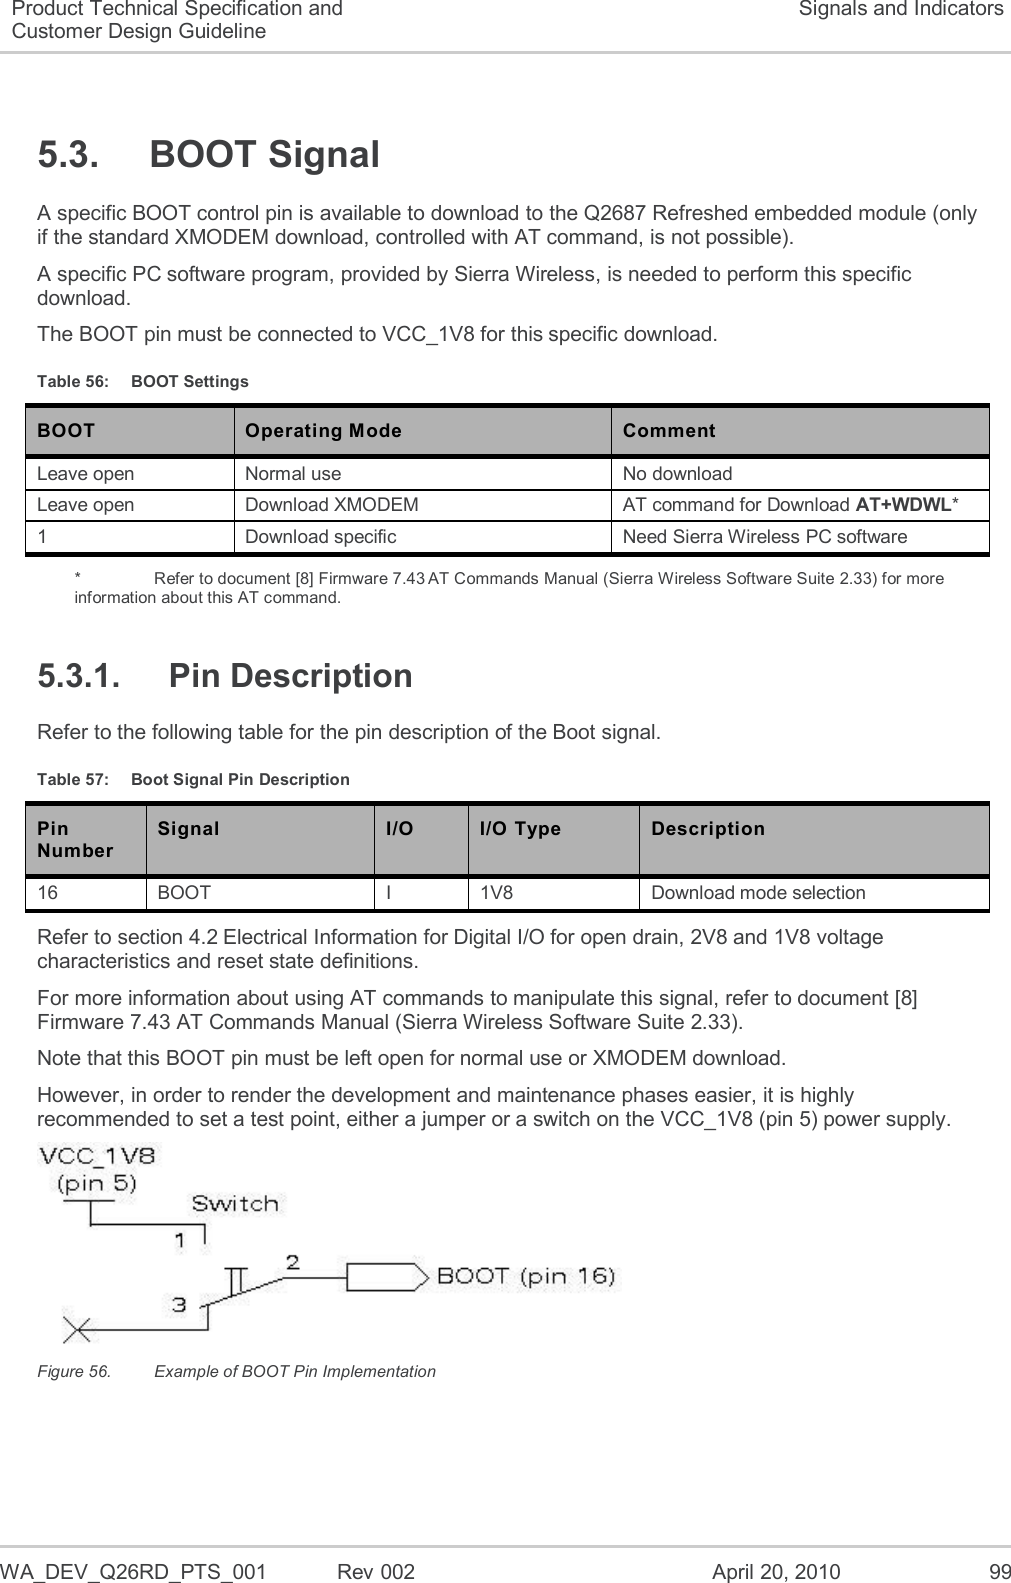   WA_DEV_Q26RD_PTS_001  Rev 002  April 20, 2010 99 Product Technical Specification and Customer Design Guideline Signals and Indicators 5.3.  BOOT Signal A specific BOOT control pin is available to download to the Q2687 Refreshed embedded module (only if the standard XMODEM download, controlled with AT command, is not possible). A specific PC software program, provided by Sierra Wireless, is needed to perform this specific download. The BOOT pin must be connected to VCC_1V8 for this specific download. Table 56:  BOOT Settings BOOT Operating Mode Comment Leave open Normal use No download Leave open Download XMODEM AT command for Download AT+WDWL* 1 Download specific Need Sierra Wireless PC software *    Refer to document [8] Firmware 7.43 AT Commands Manual (Sierra Wireless Software Suite 2.33) for more information about this AT command. 5.3.1.  Pin Description Refer to the following table for the pin description of the Boot signal. Table 57:  Boot Signal Pin Description Pin Number Signal I/O I/O Type Description 16 BOOT I 1V8 Download mode selection Refer to section 4.2 Electrical Information for Digital I/O for open drain, 2V8 and 1V8 voltage characteristics and reset state definitions. For more information about using AT commands to manipulate this signal, refer to document [8] Firmware 7.43 AT Commands Manual (Sierra Wireless Software Suite 2.33). Note that this BOOT pin must be left open for normal use or XMODEM download. However, in order to render the development and maintenance phases easier, it is highly recommended to set a test point, either a jumper or a switch on the VCC_1V8 (pin 5) power supply.  Figure 56.  Example of BOOT Pin Implementation 